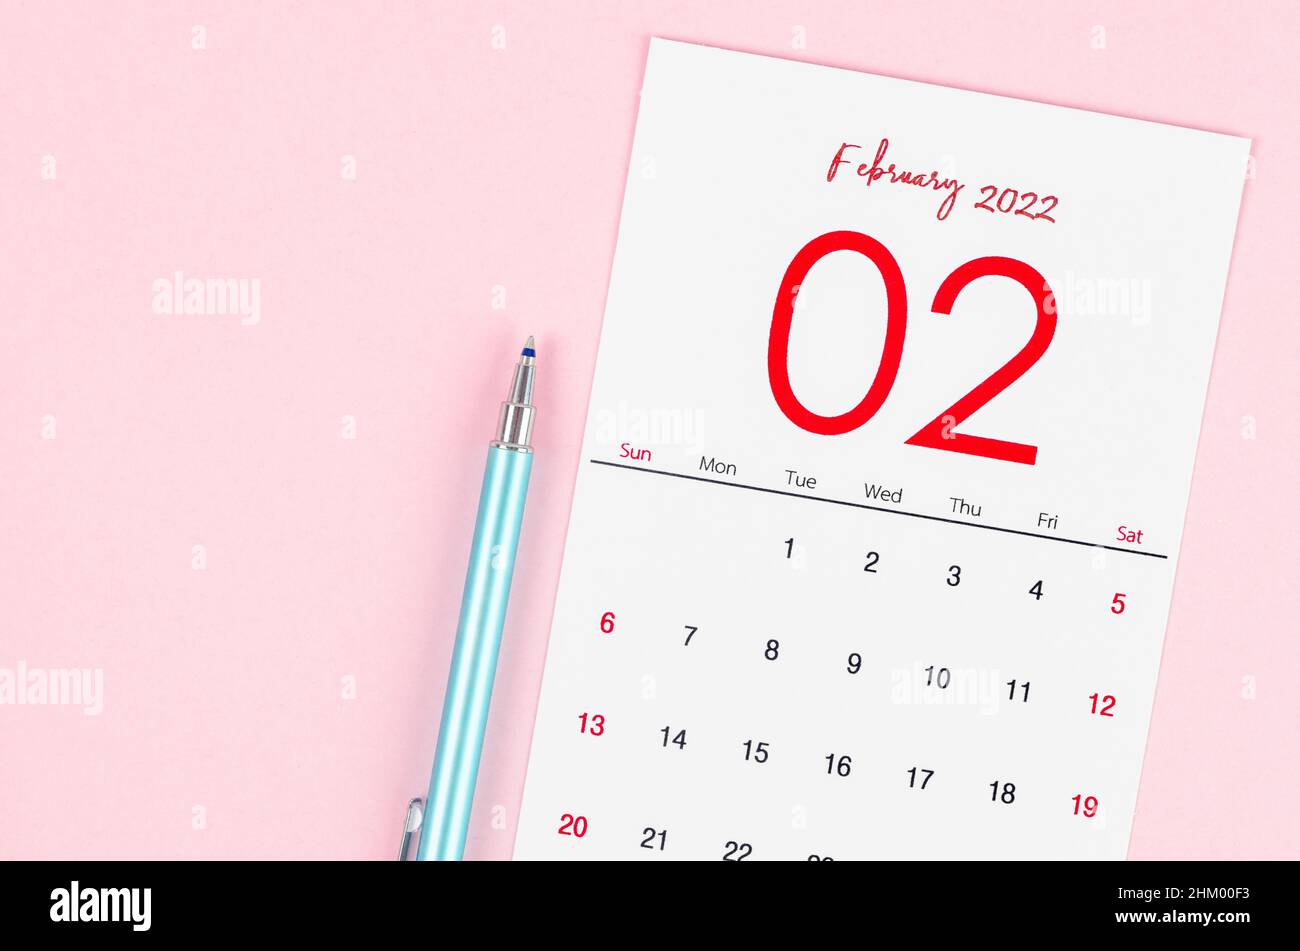 The February 2022 calendar with pen on pink background. Stock Photo